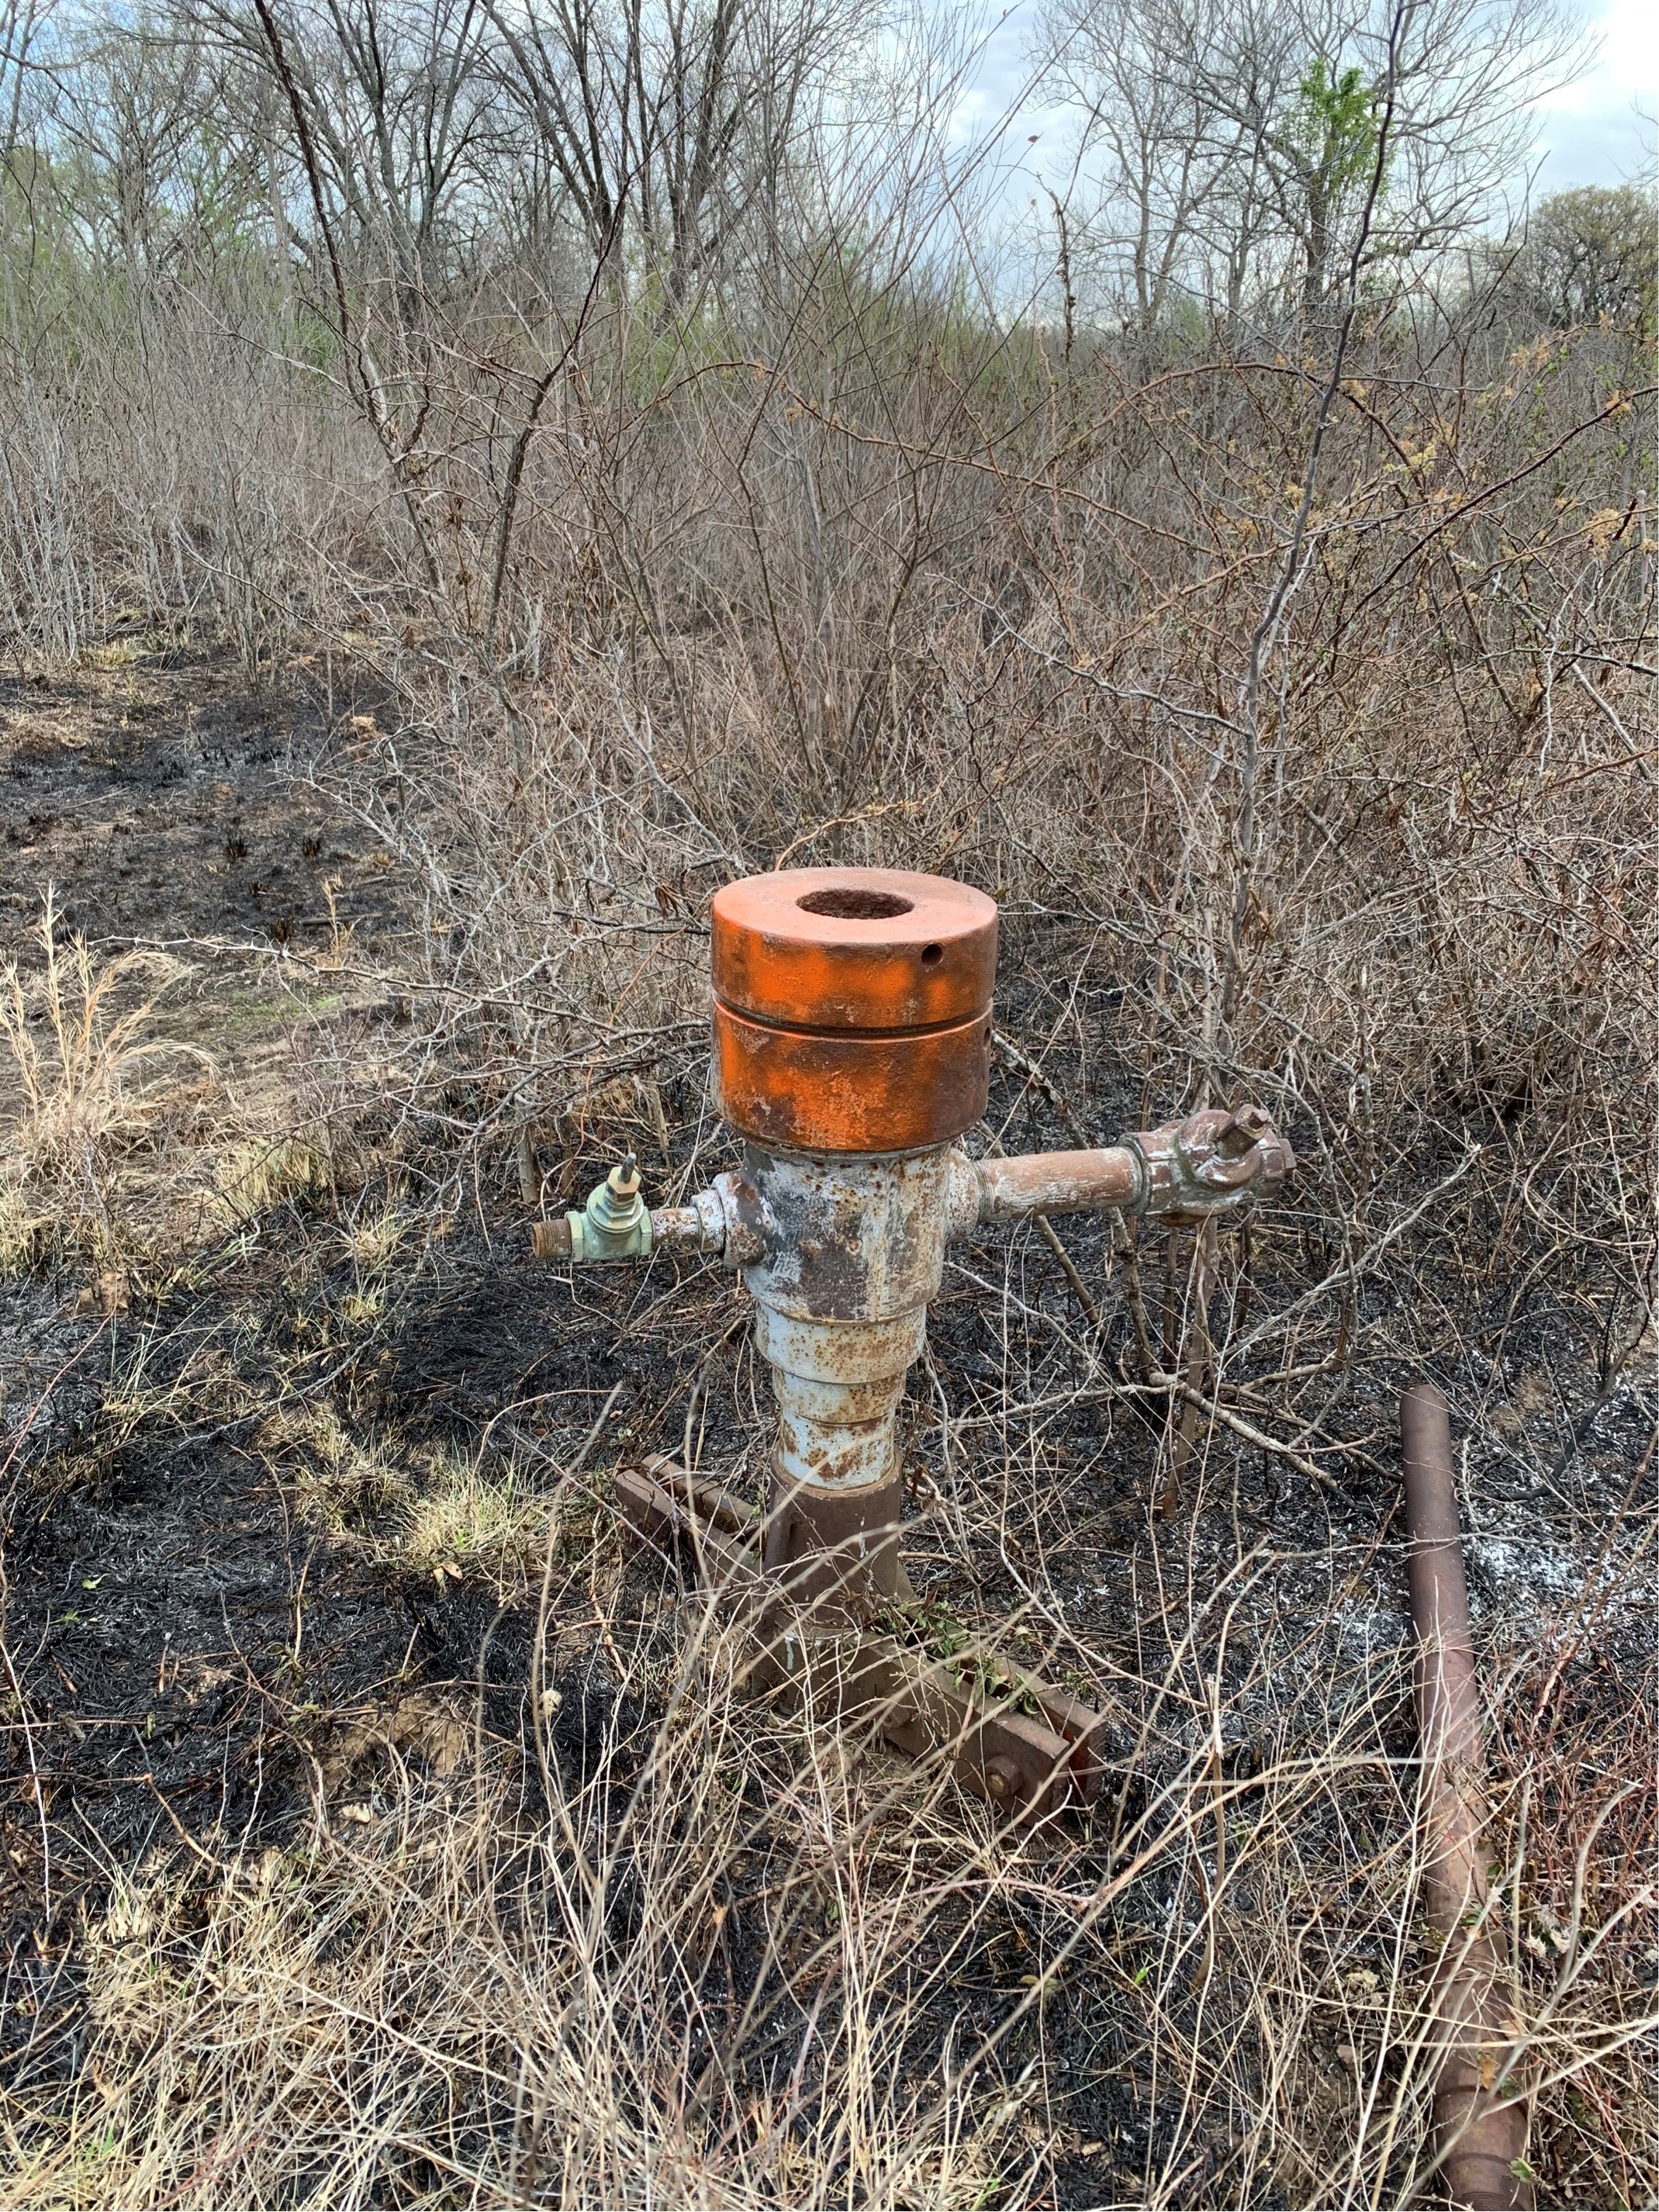 orange topped metal structure in ground